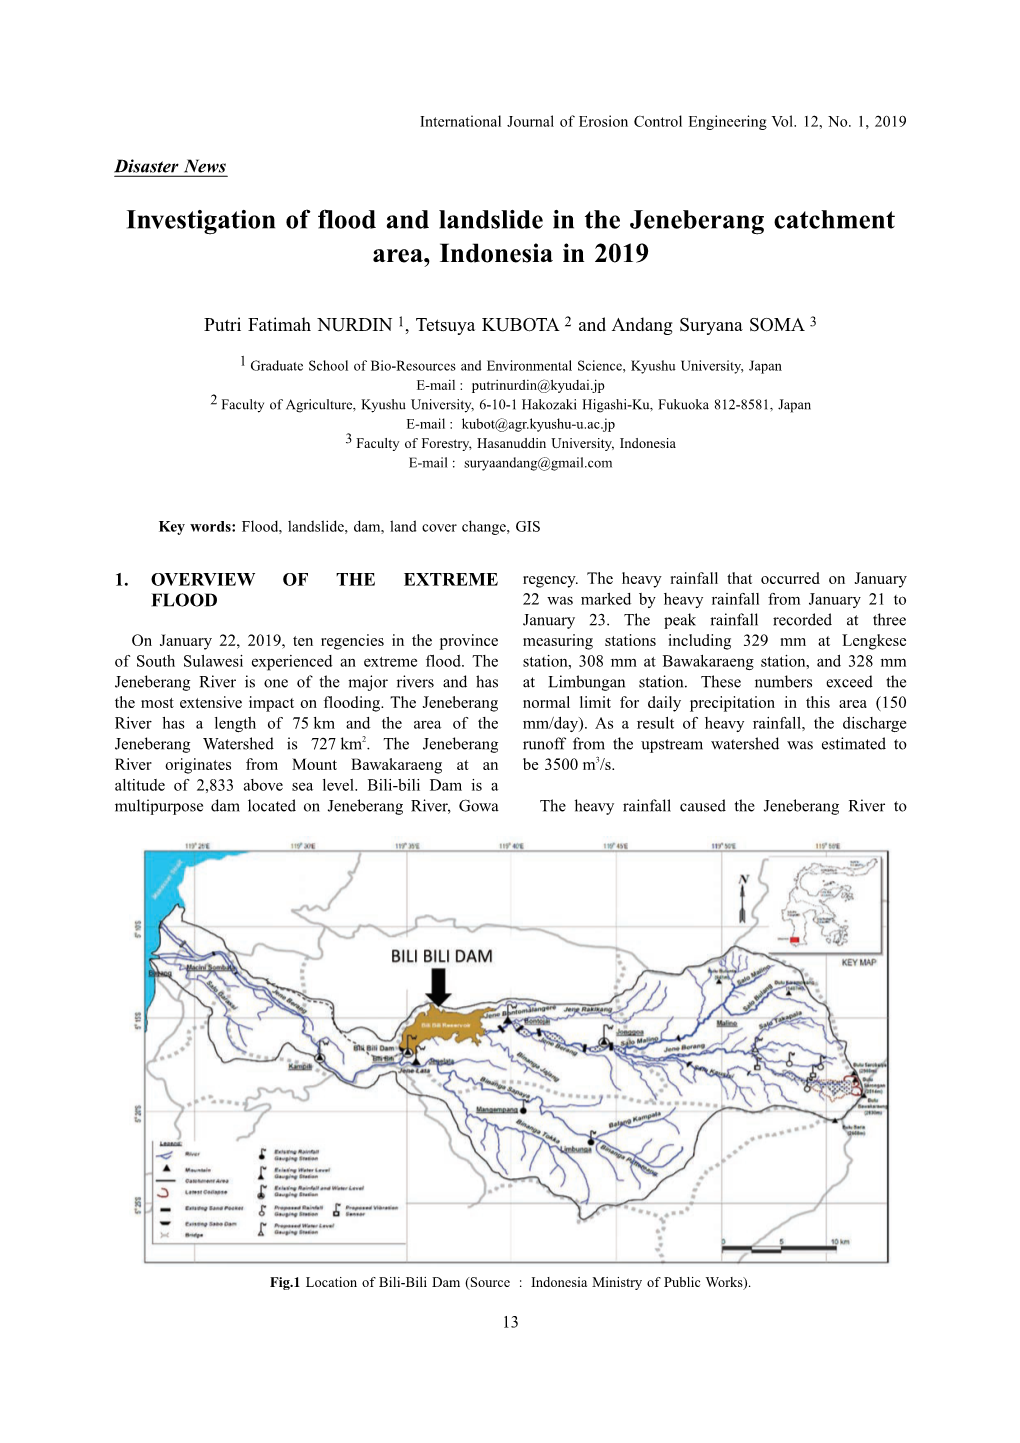 Investigation of Flood and Landslide in the Jeneberang Catchment Area, Indonesia in 2019